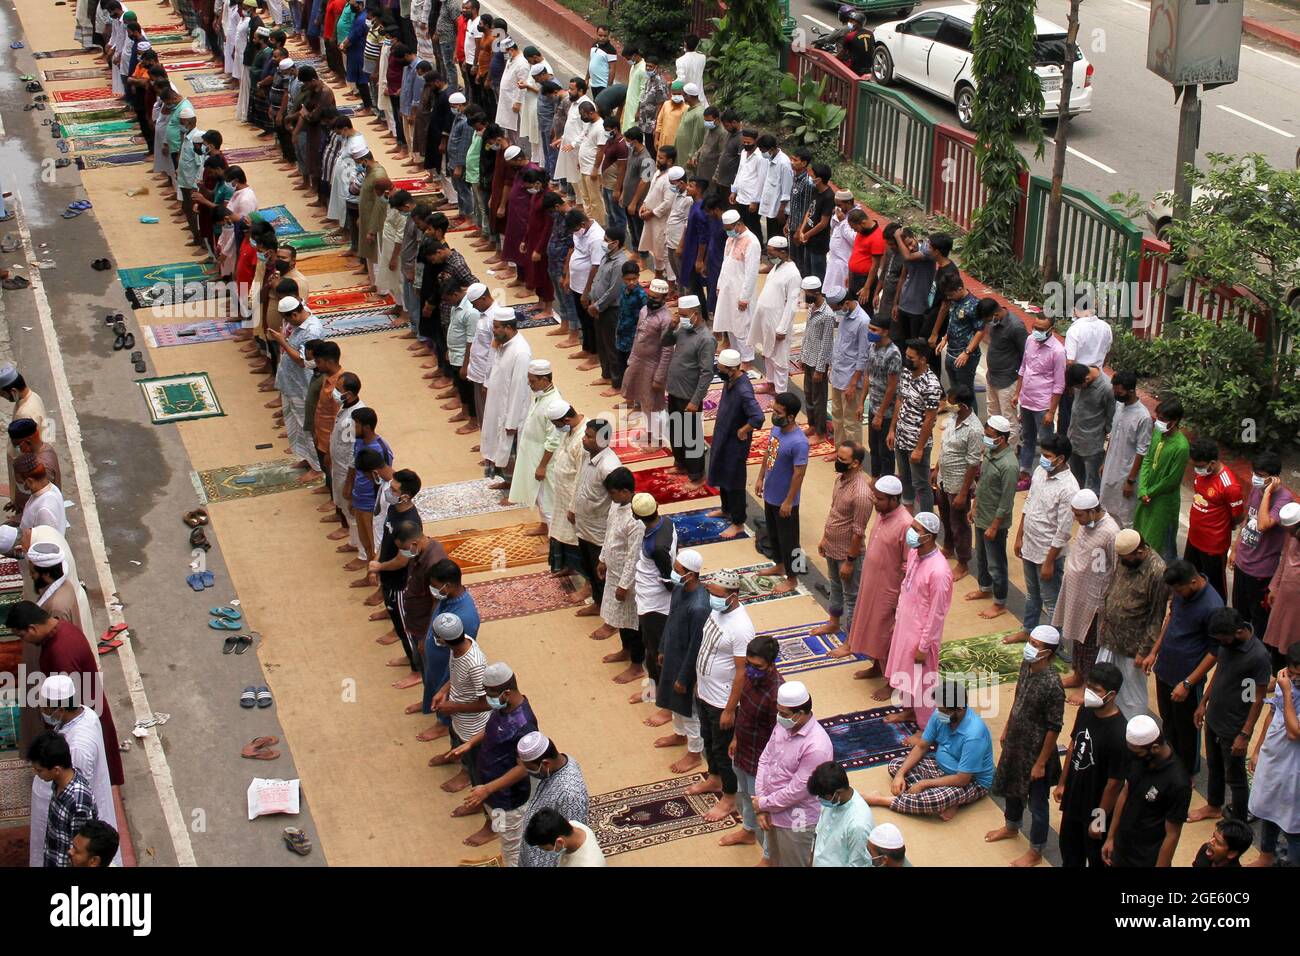 DHAKA, BANGLADESH  -AUGUST 13: Aerial view of thousands of Muslims meeting  take part during a mass  Jummah Prayer, Due this Islamic ritual is mandatory act, it is performed every Friday to fulfill its obligations as a faithful.  Jummah is the holiest day of the week on which special congregational prayers are offered. Fridays are considered a celebration in their own right and Muslims take special care in wearing clean clothes, bathing, and preparing special meals on this day. On August 13, 2021 in Dhaka, Bangladesh. Credit: Eyepix Group/The Photo Access Stock Photo